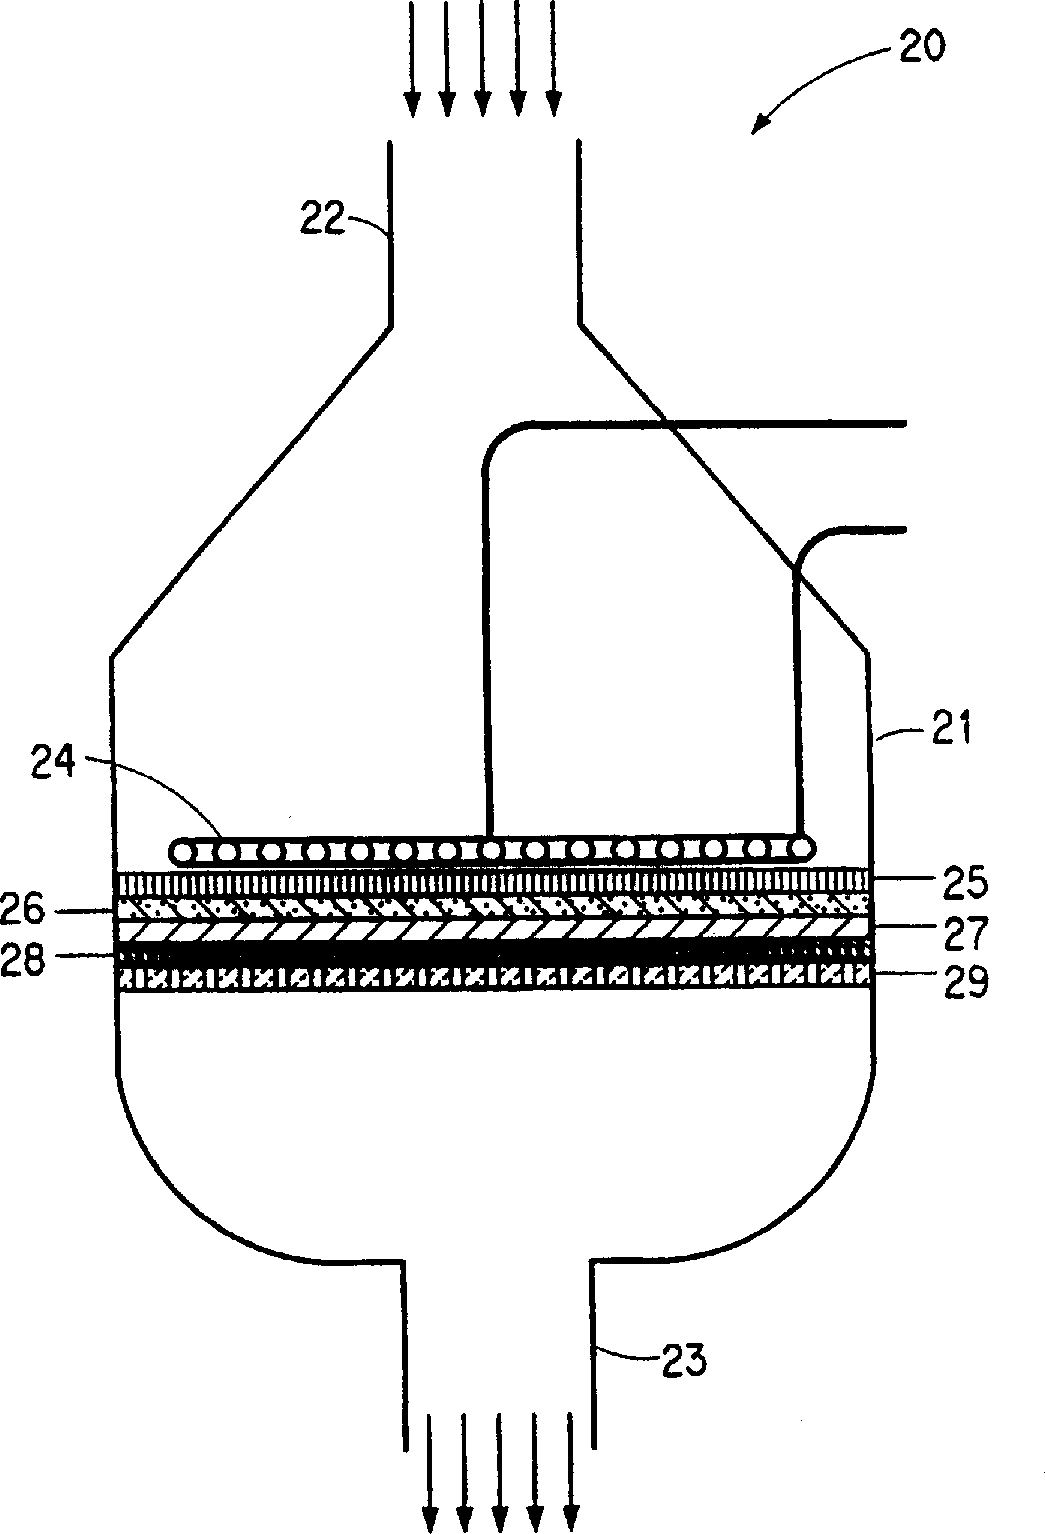 Inductively heated catalytic reactor